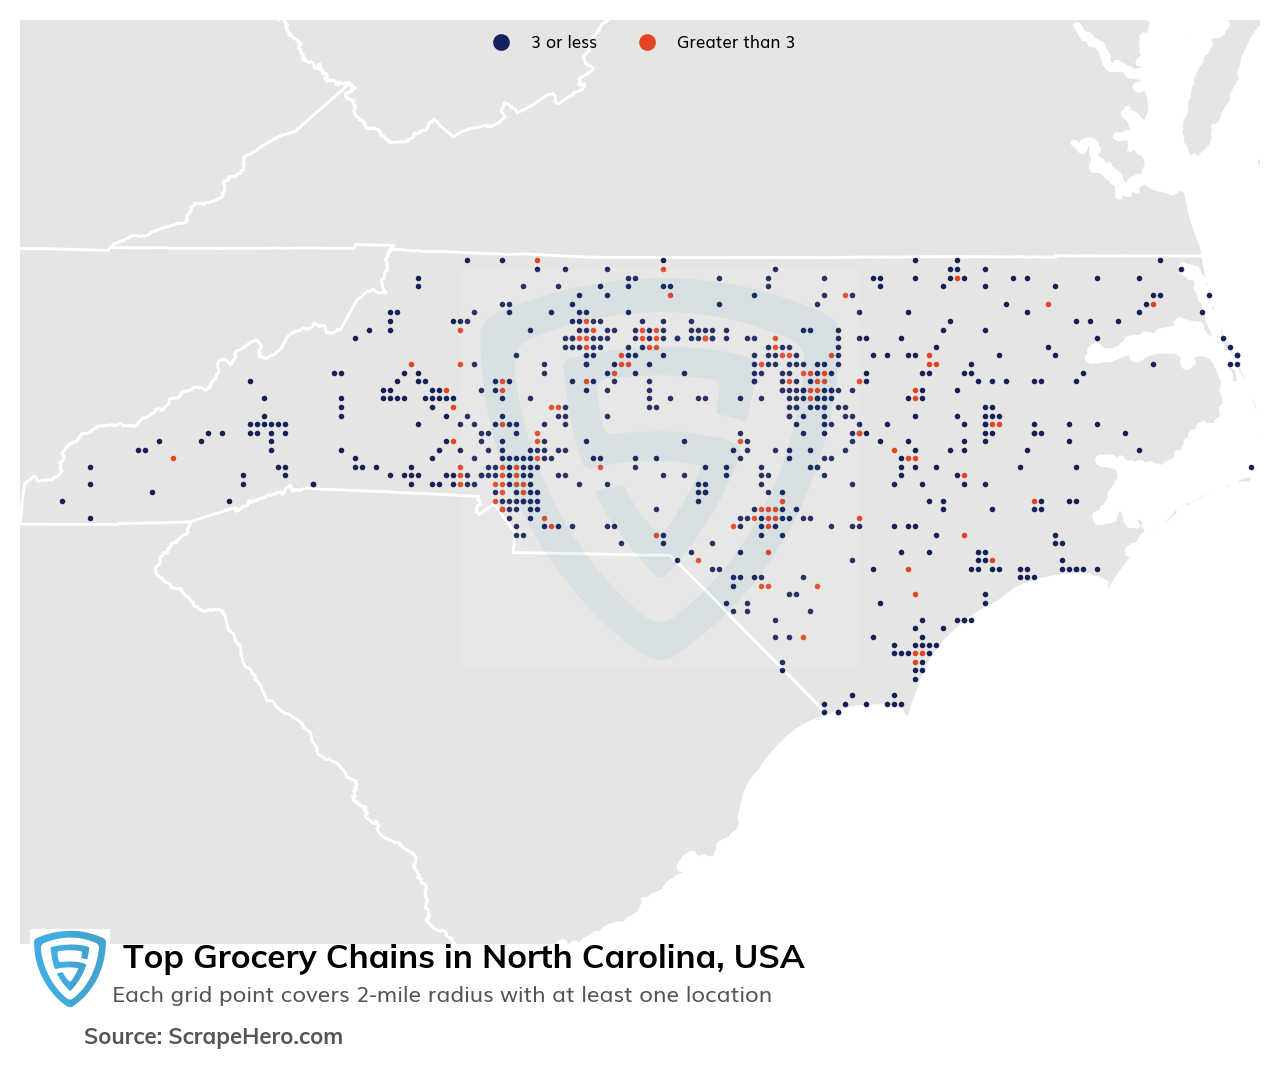 Map of 10 Largest grocery chains in North Carolina in 2023 Based on Locations